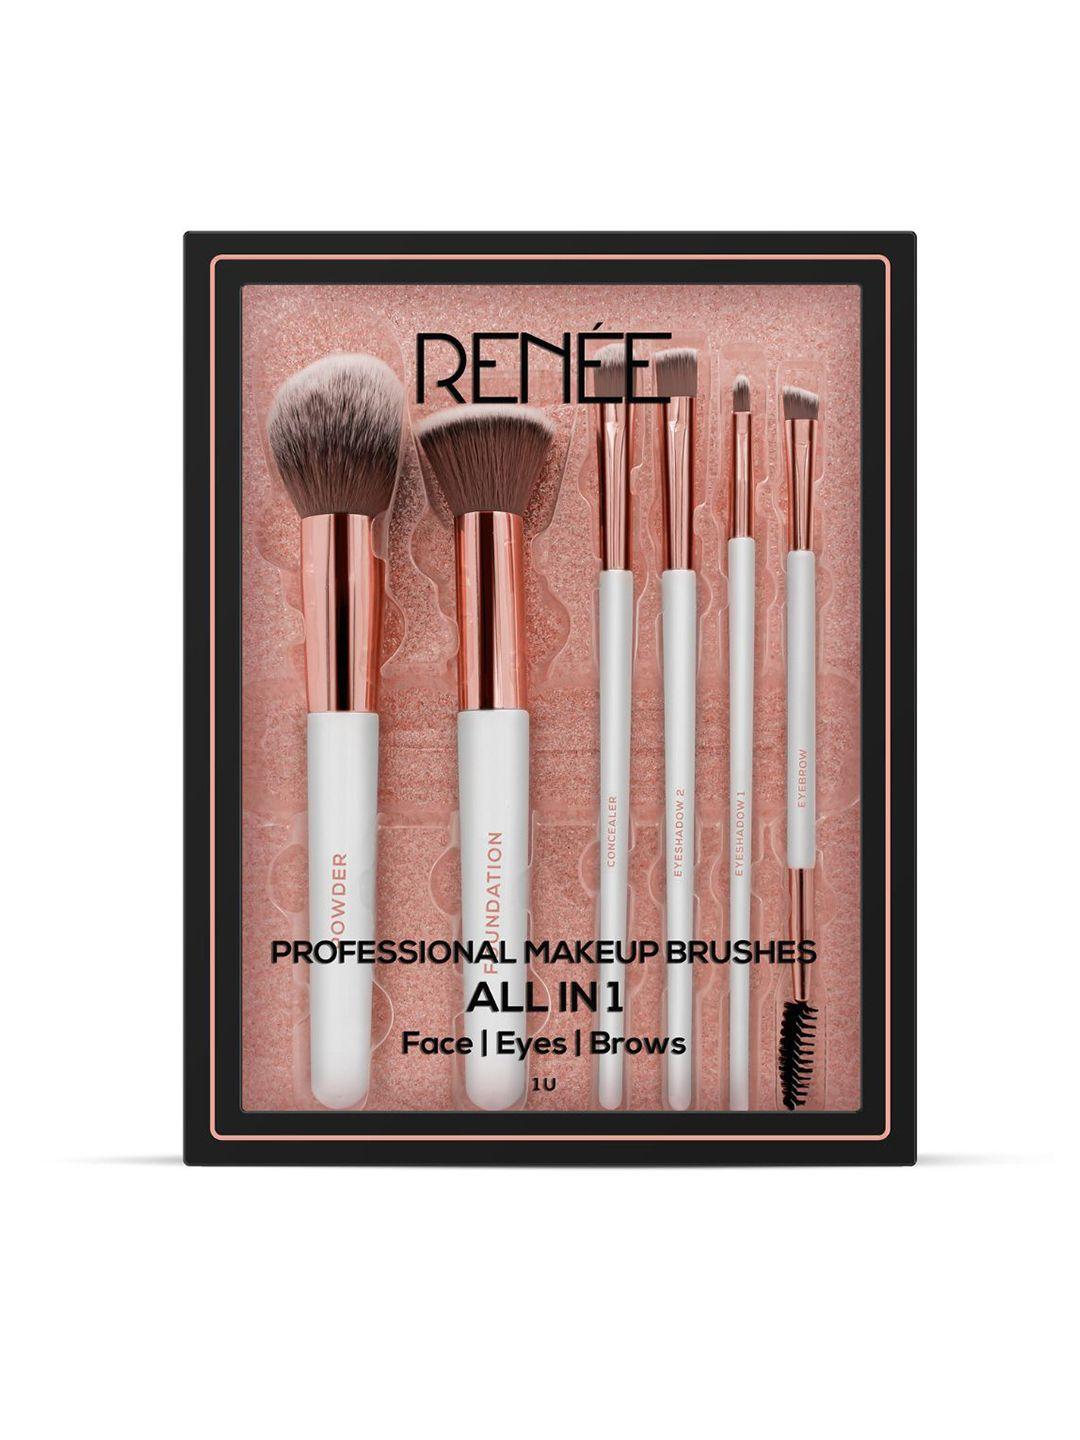 renee set of 6 all in 1 professional makeup brushes